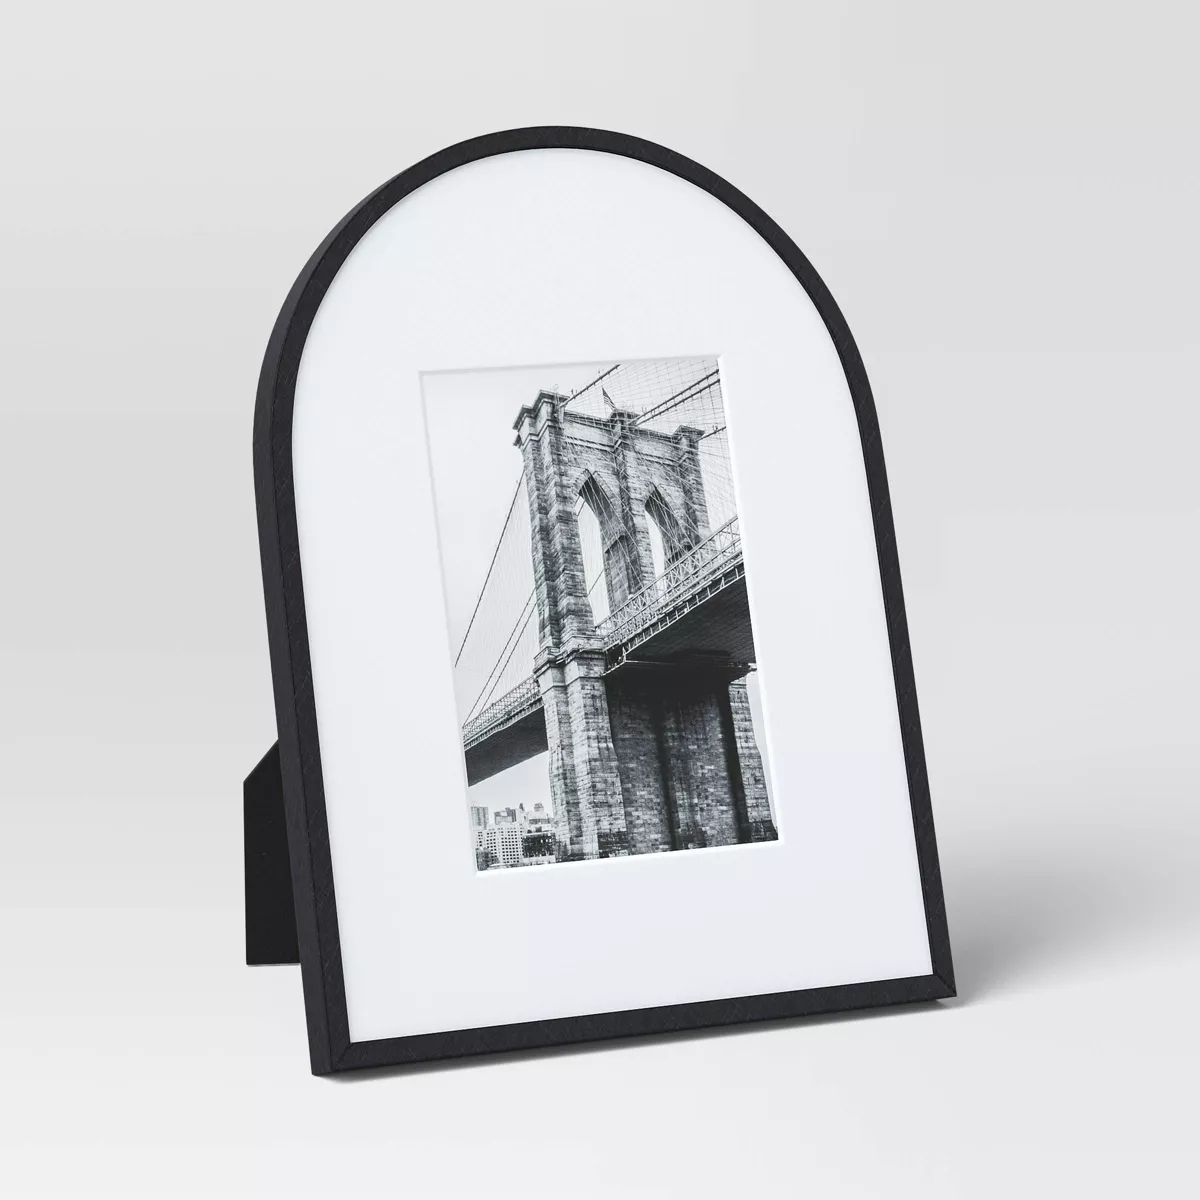 9"x12" Matted to 5"x7" Aluminum Arch Table Frame Black - Threshold™ | Target